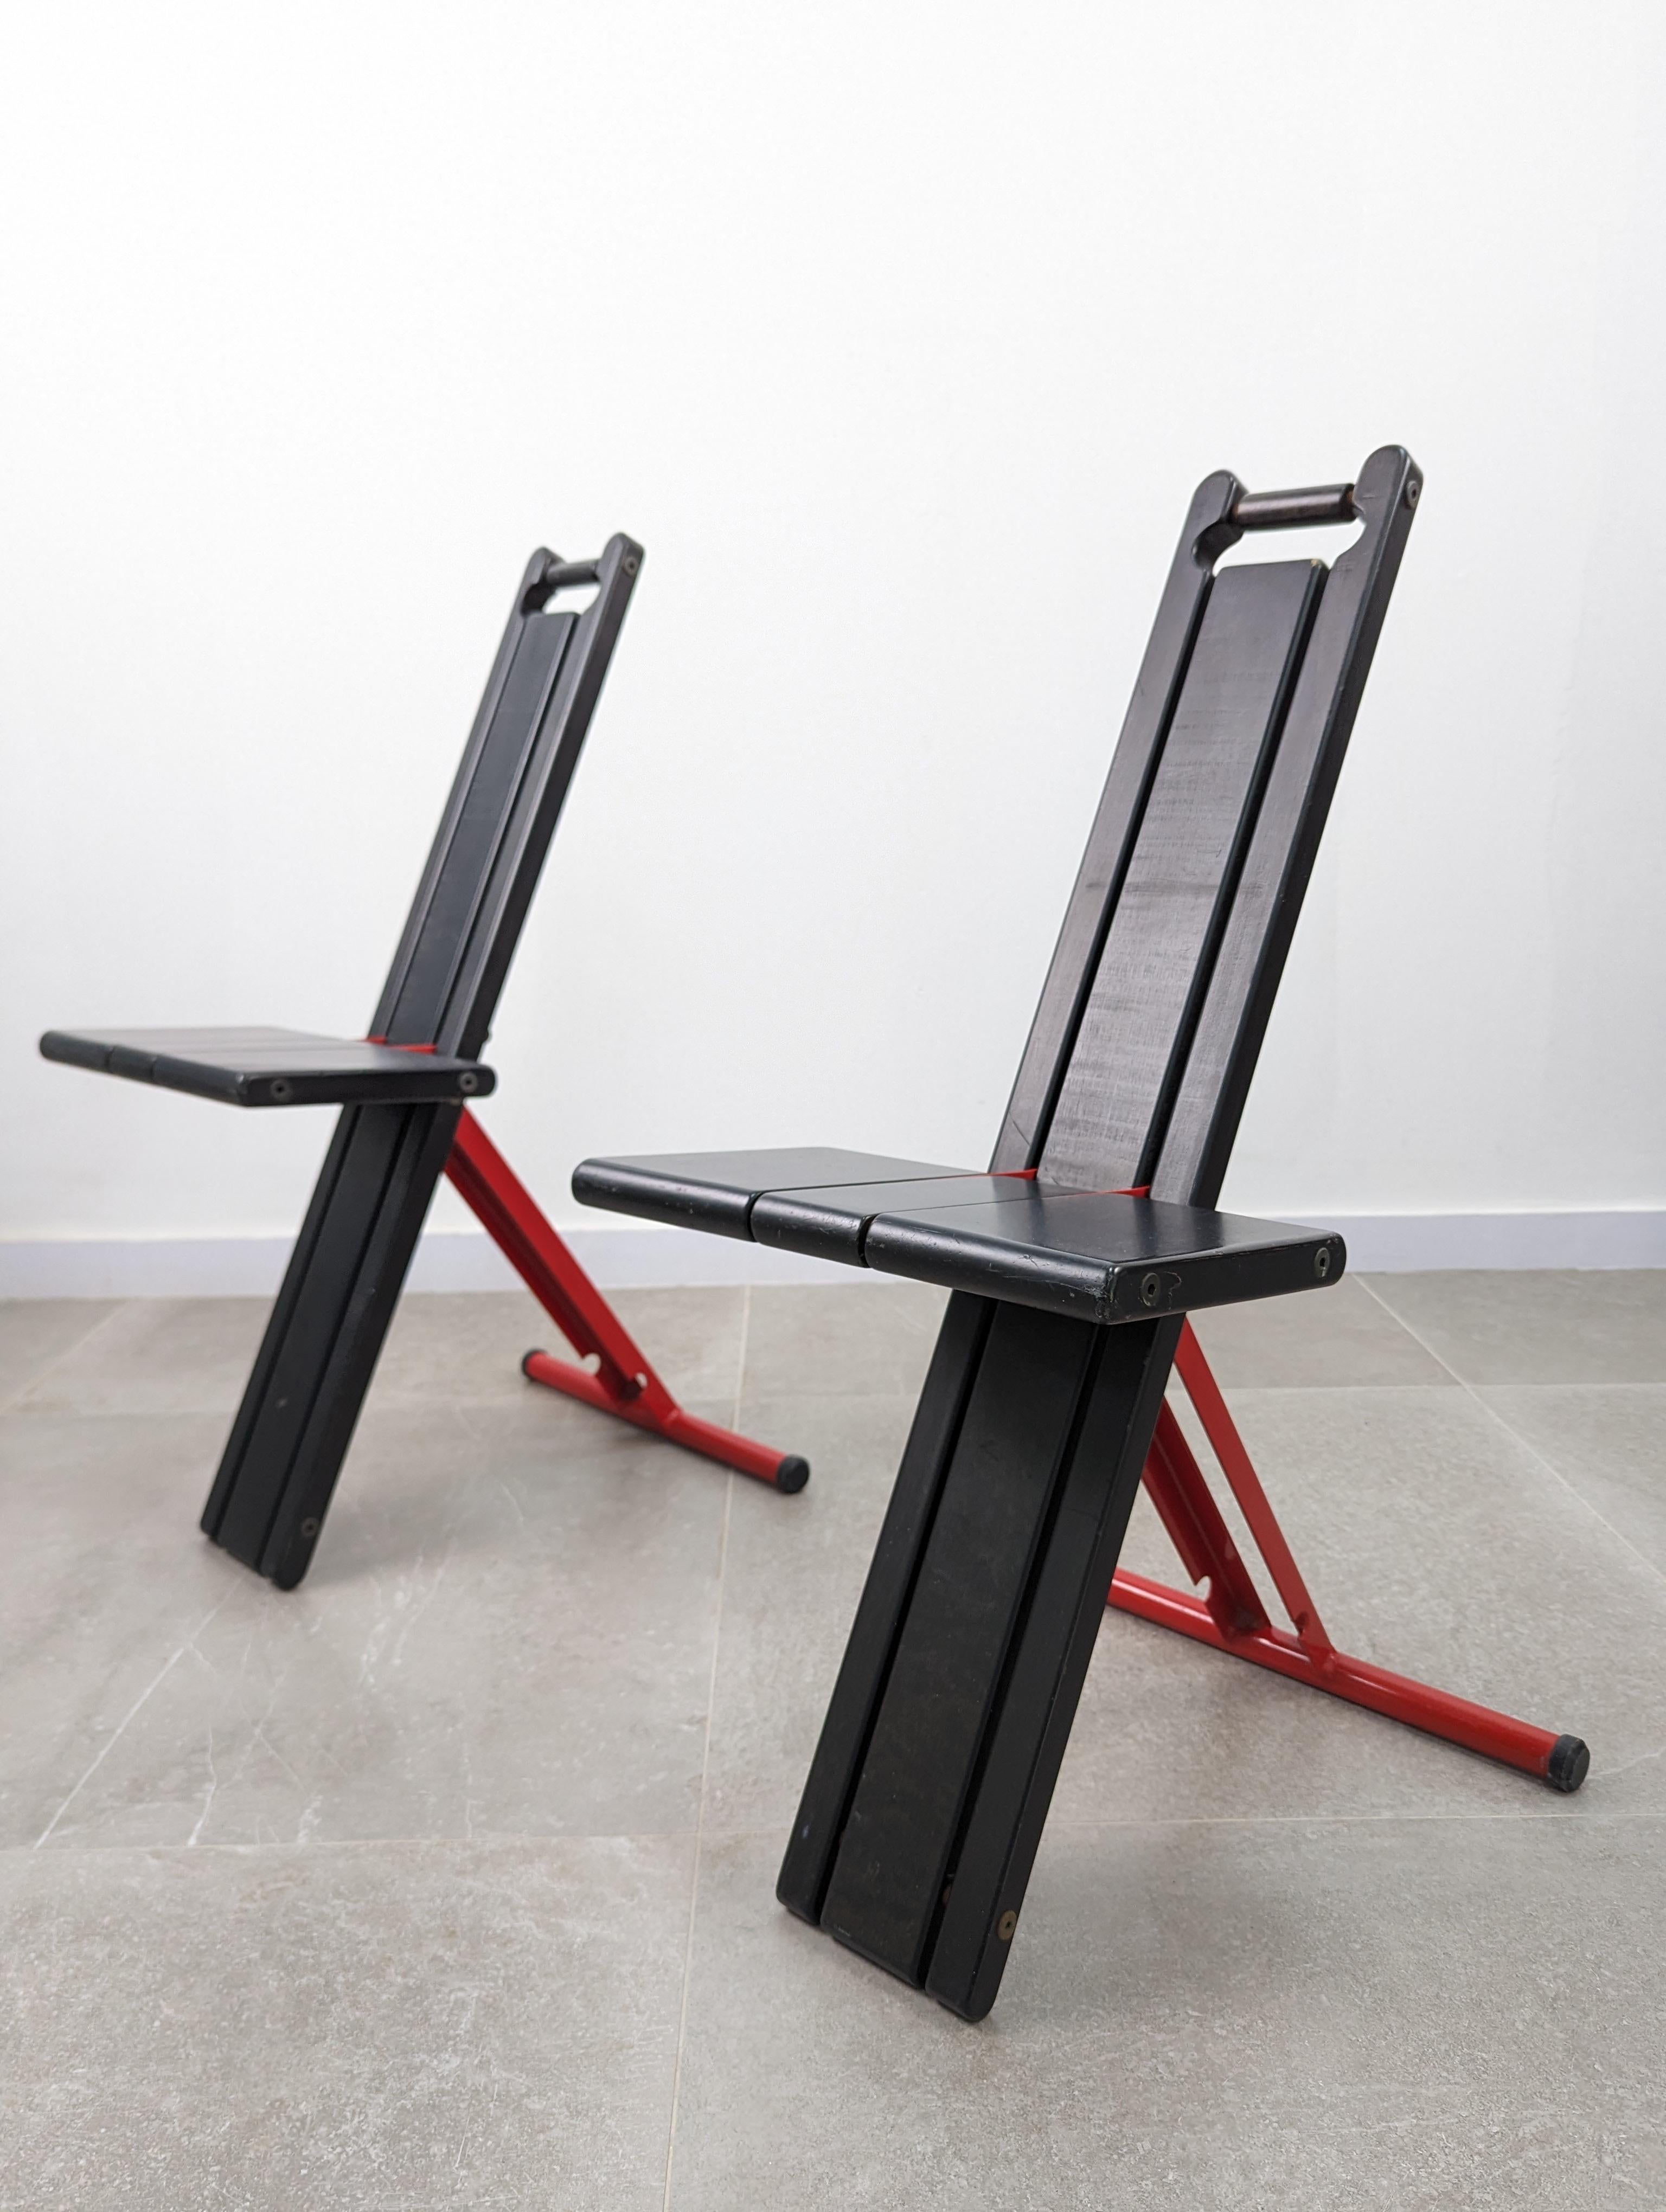 Pair of portable folding chairs designed in 1982 by Torstein Nilsen initially for Kalvatn Møbelindustri and produced in 1984 by Møremøbler AS, made of black lacquered beech, with support elements in red lacquered iron. Additionally, this design took